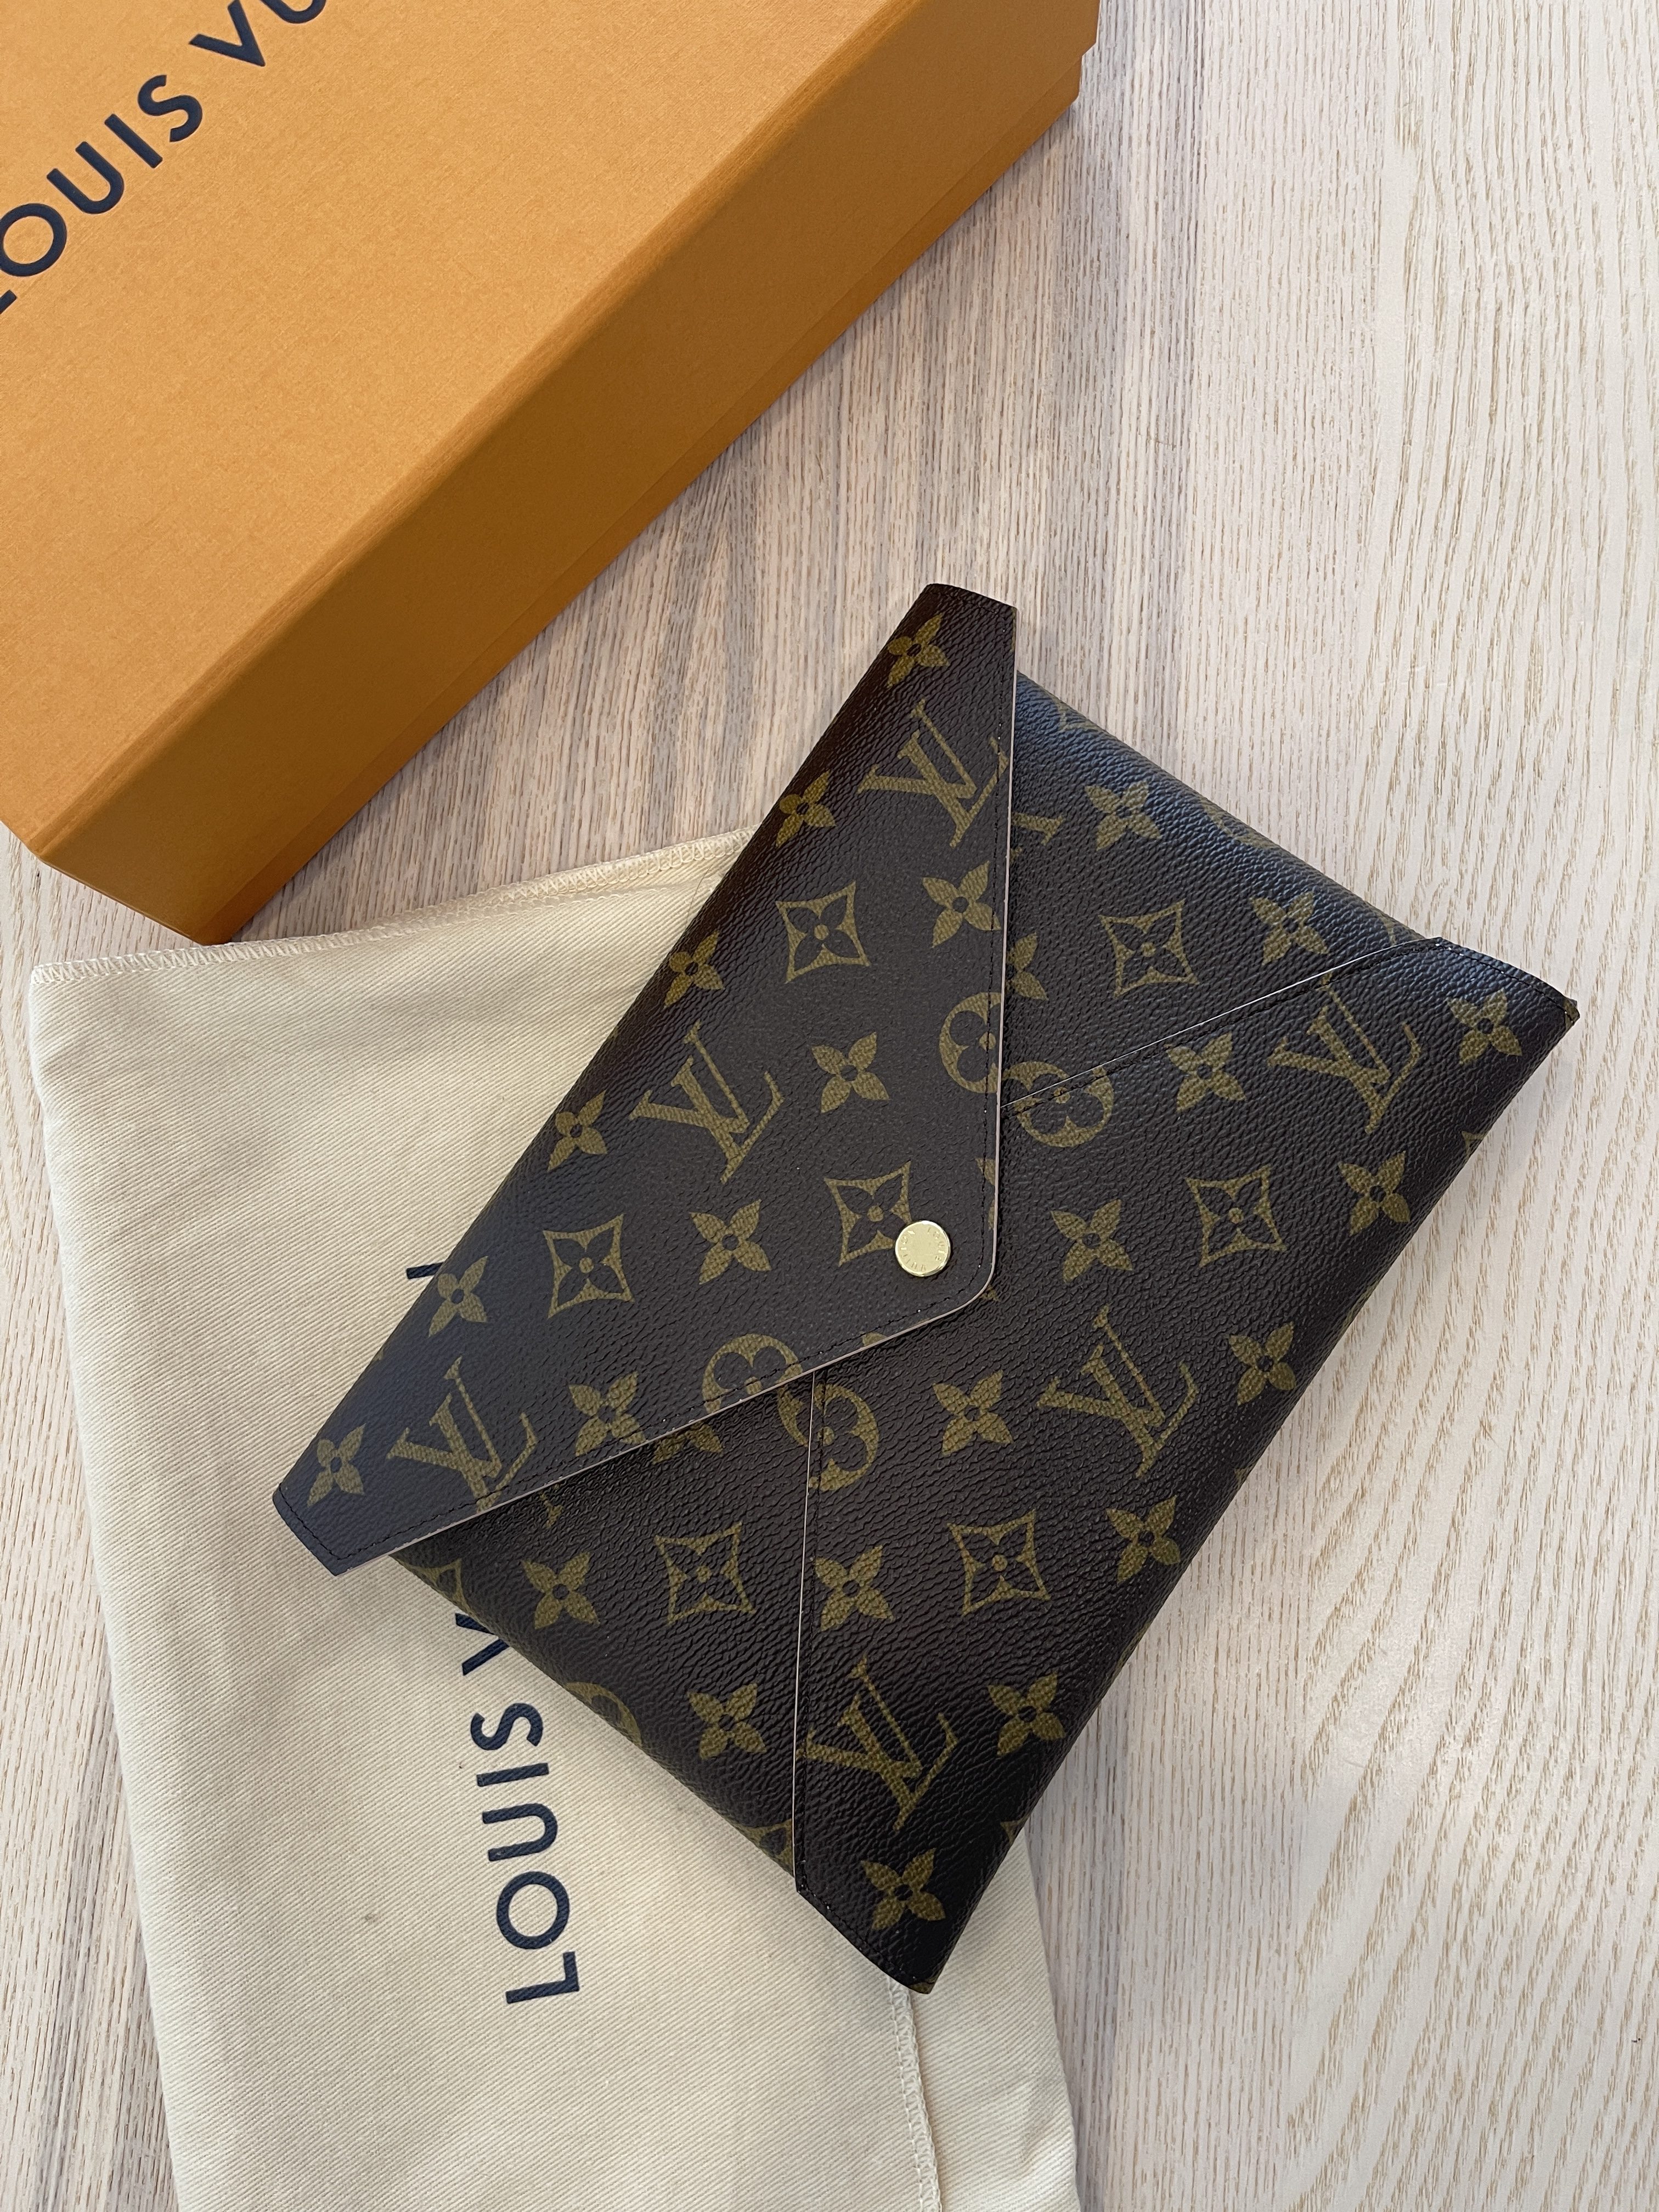 Louis Vuitton, Bags, Louis Vuitton Large Kirigami Pouch With Dustbag